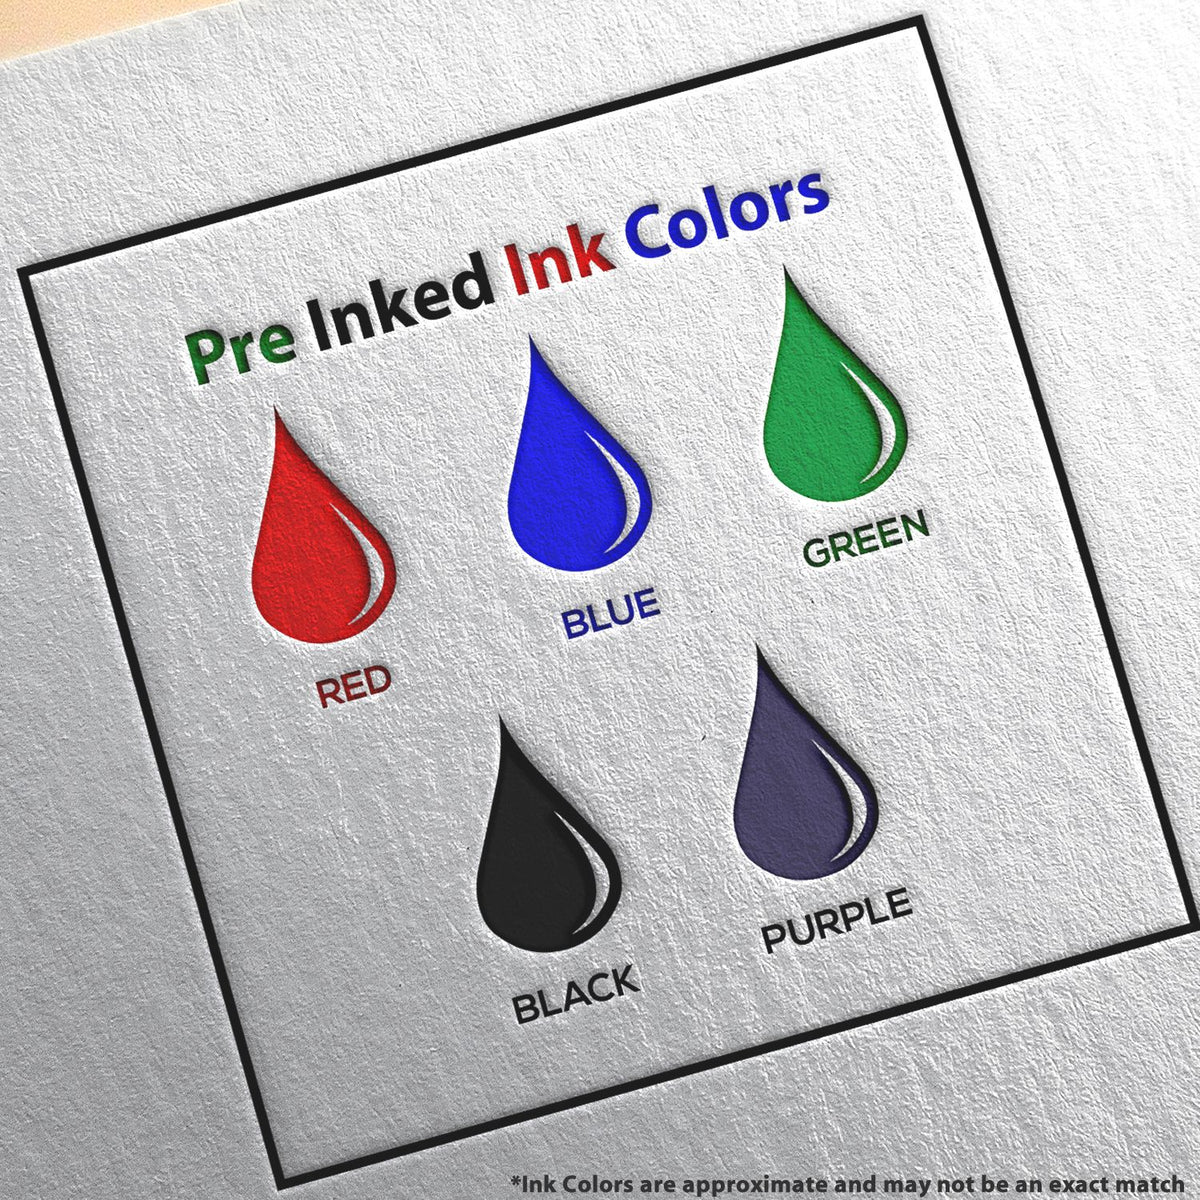 A picture showing the different ink colors or hues available for the Slim Pre-Inked Rhode Island Land Surveyor Seal Stamp product.